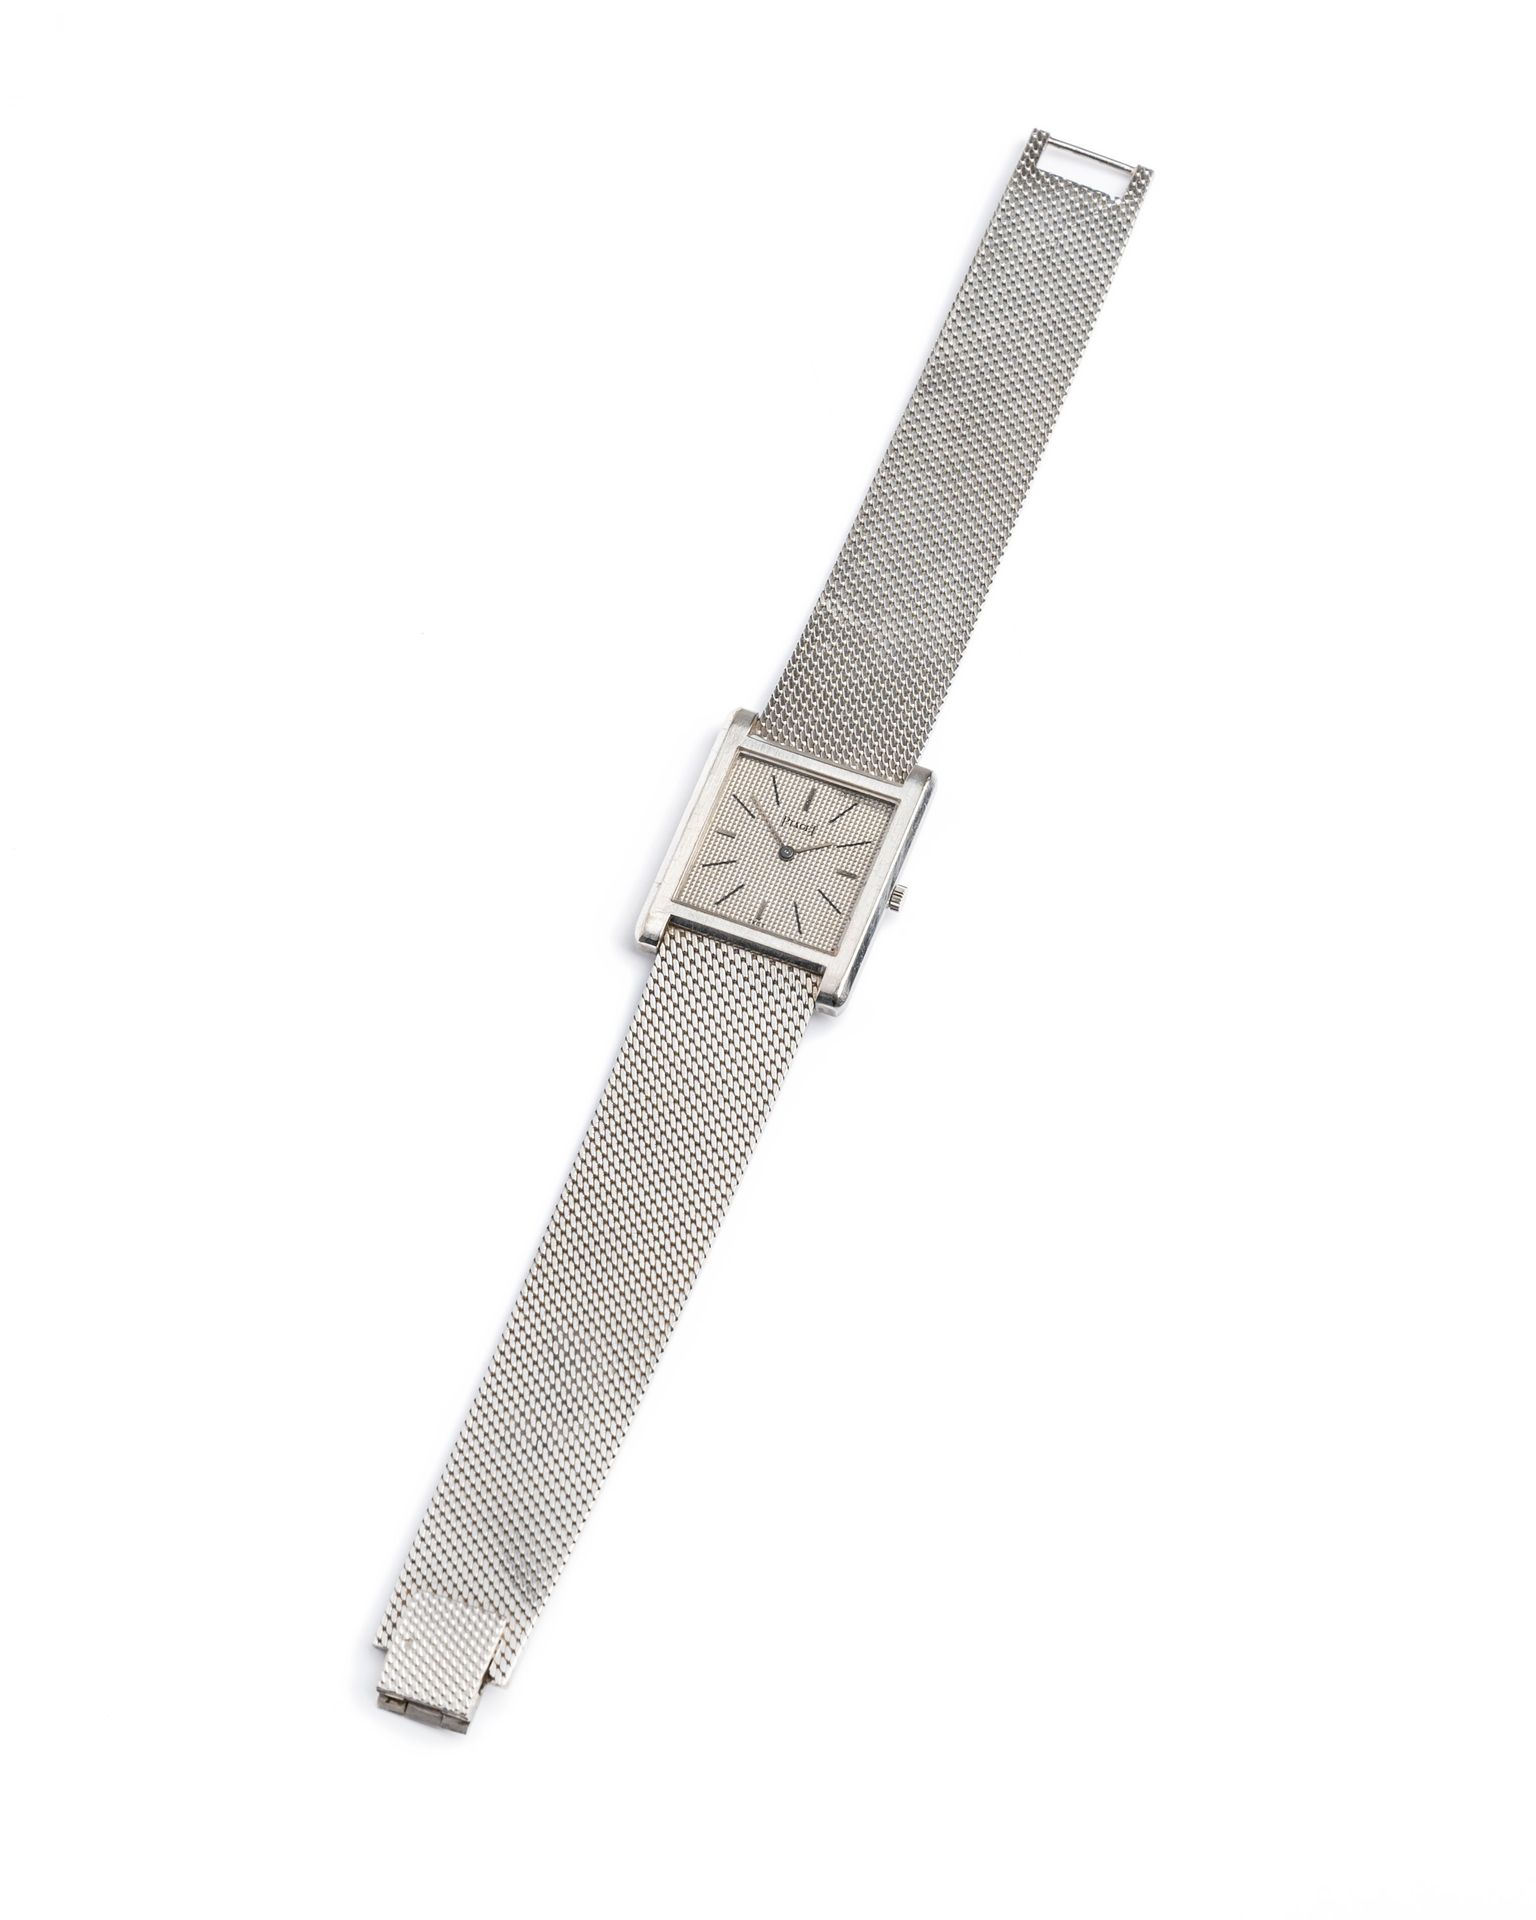 Null PIAGET
Lady's watch in 18K (750 thousandths) white gold, with a rectangular&hellip;